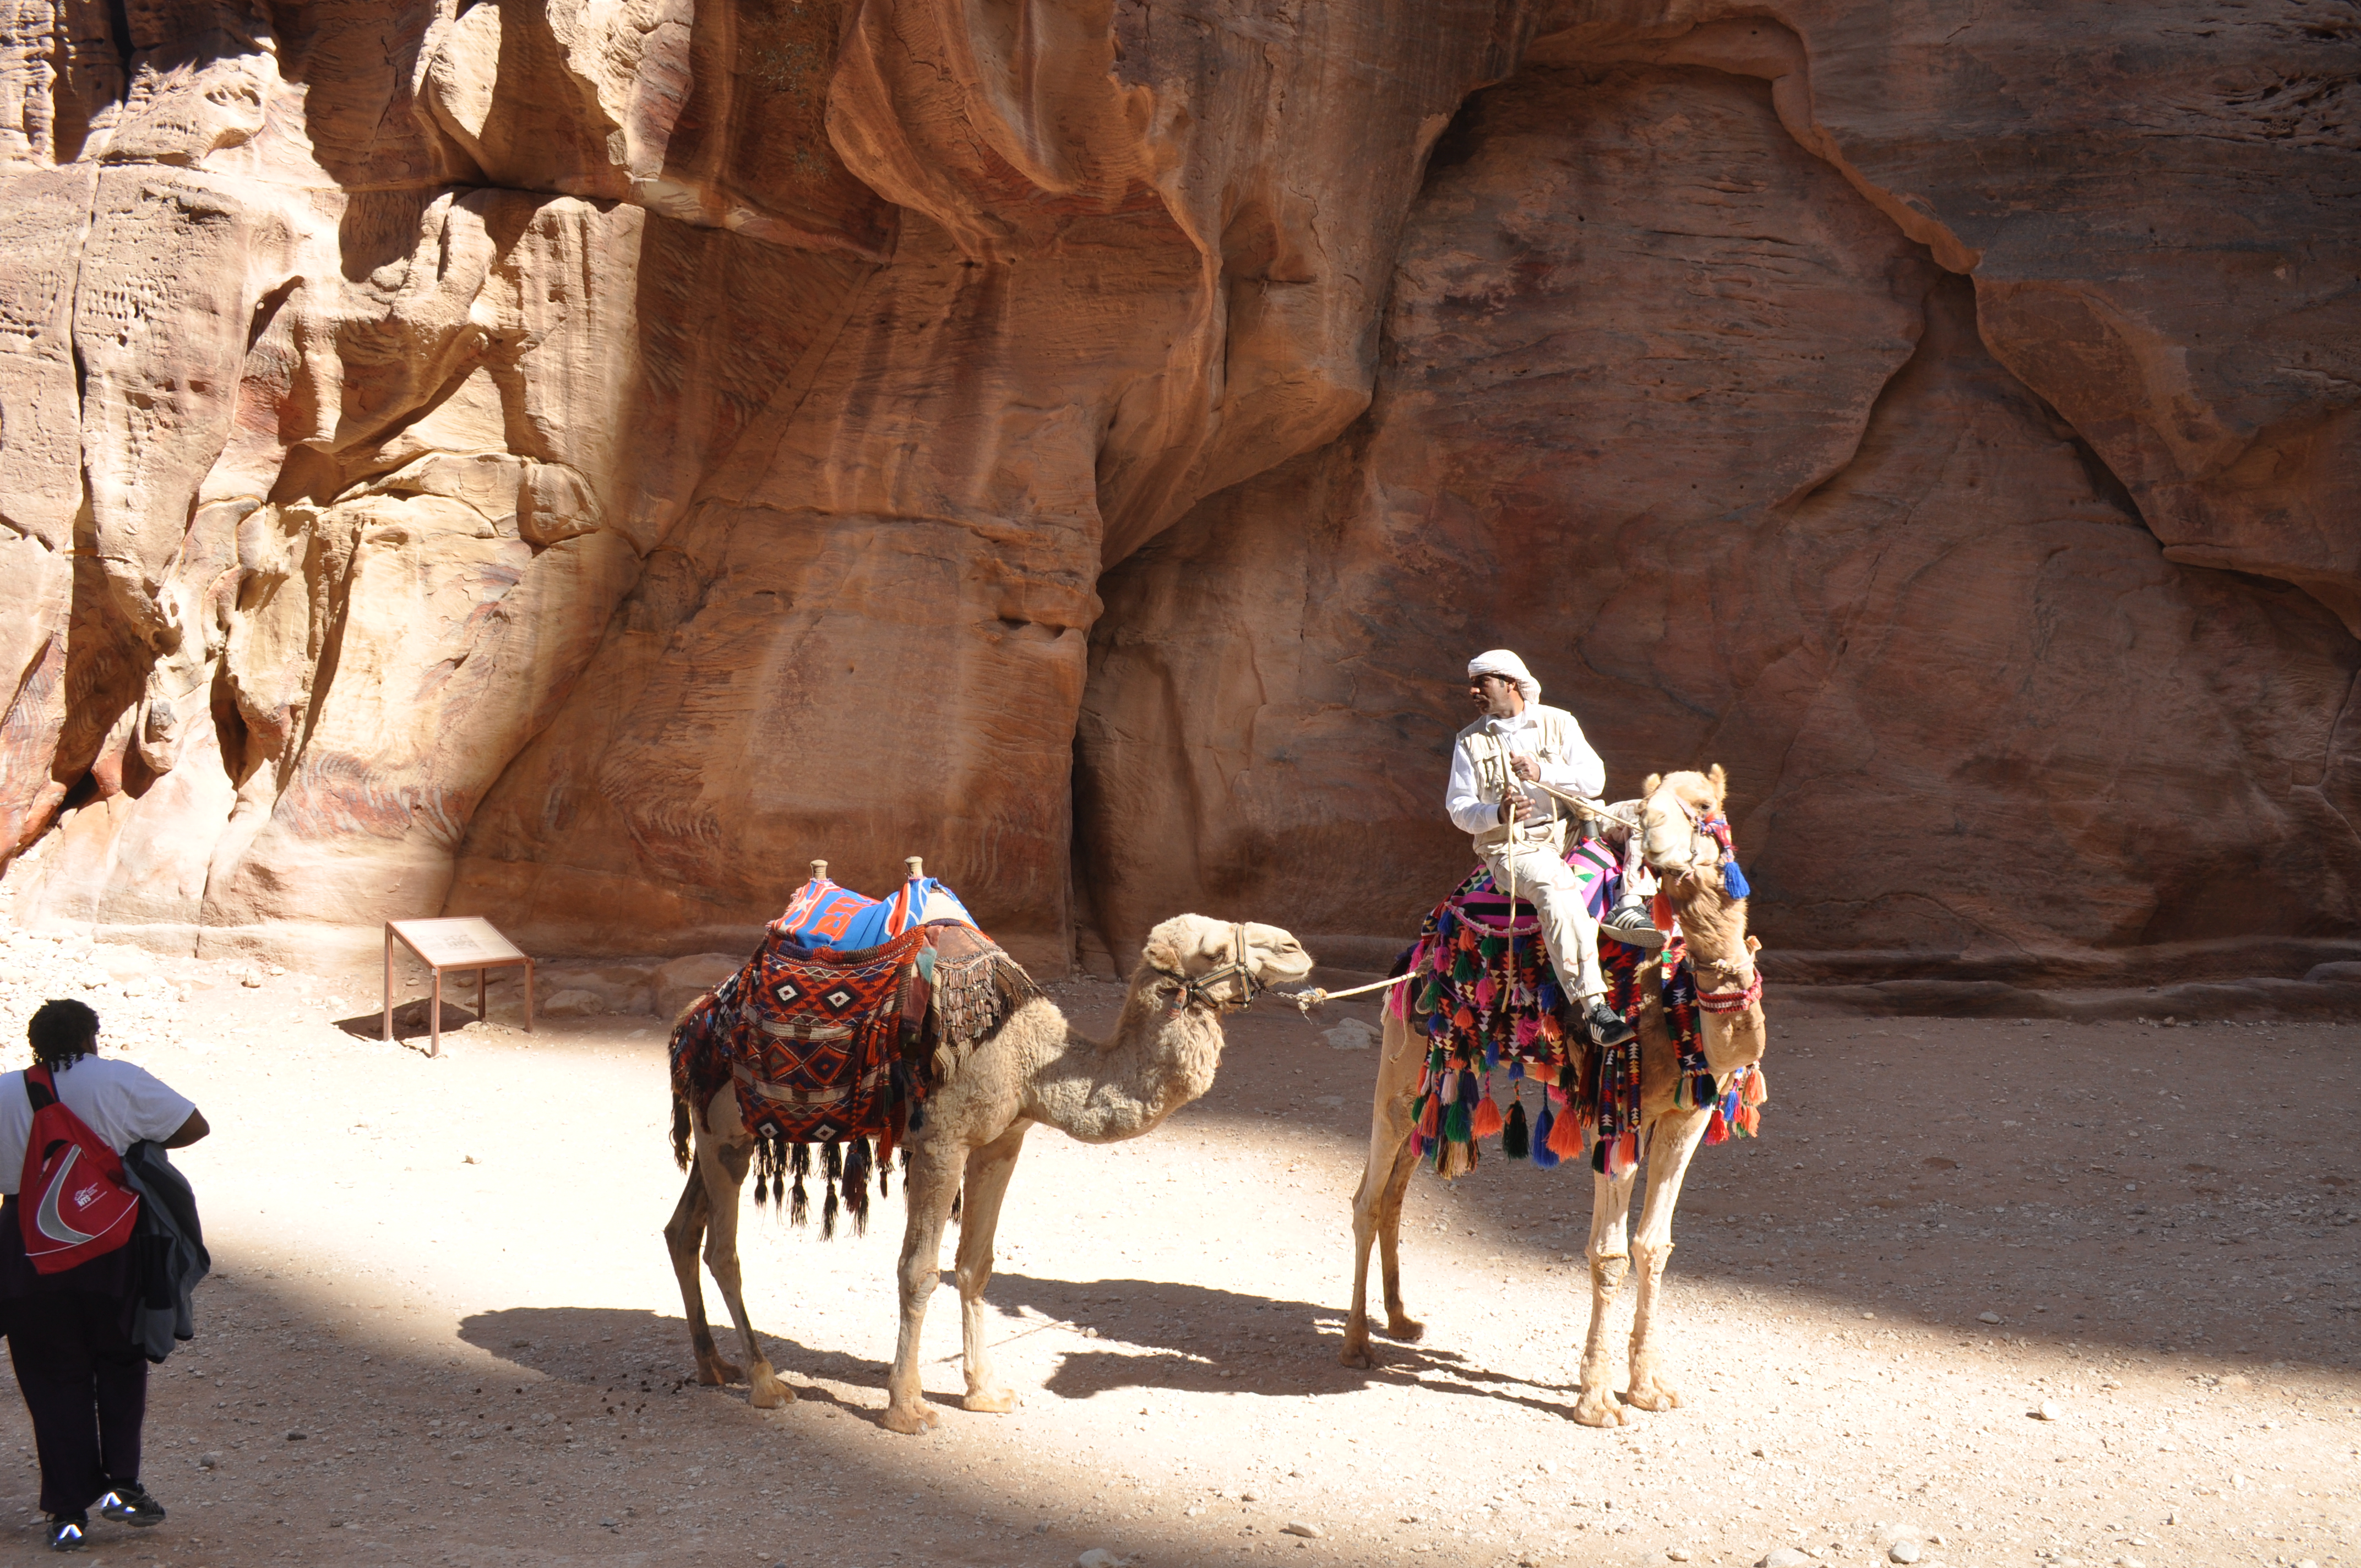 Man on a camel in the ancient city of Petra